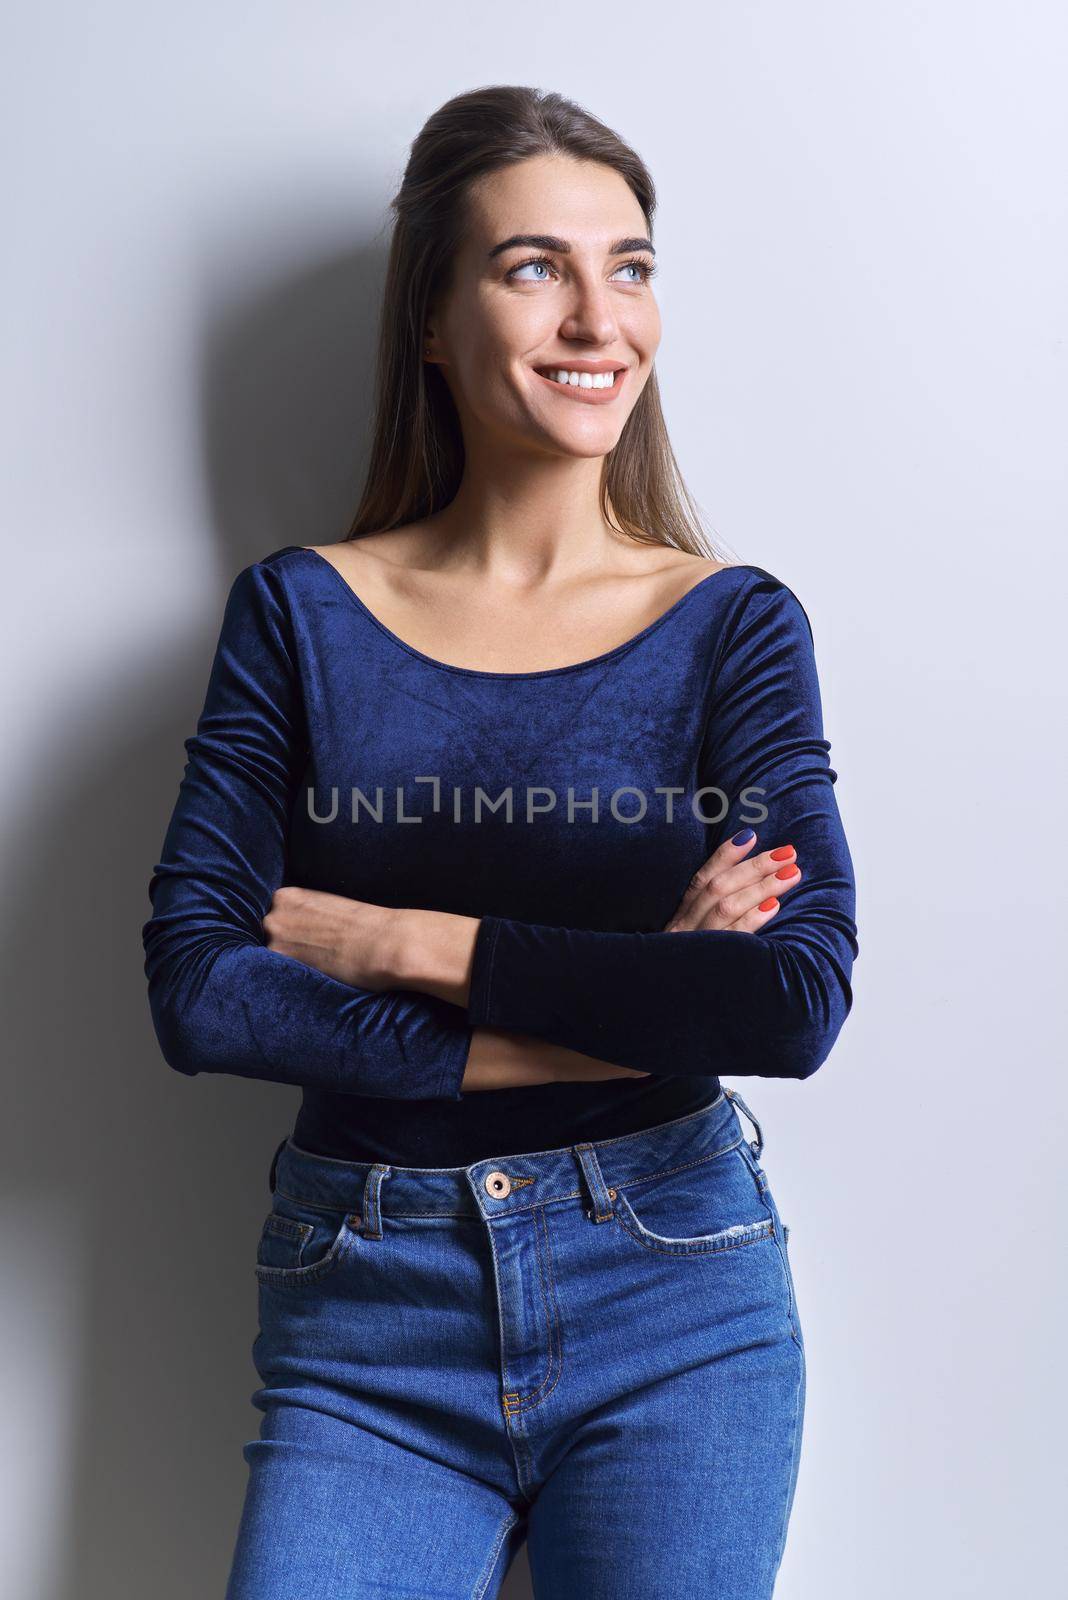 Beauty fashion portrait of young woman in blue body, jeans, white background. Successful beautiful confident smiling woman with healthy white teeth, straight healthy hair